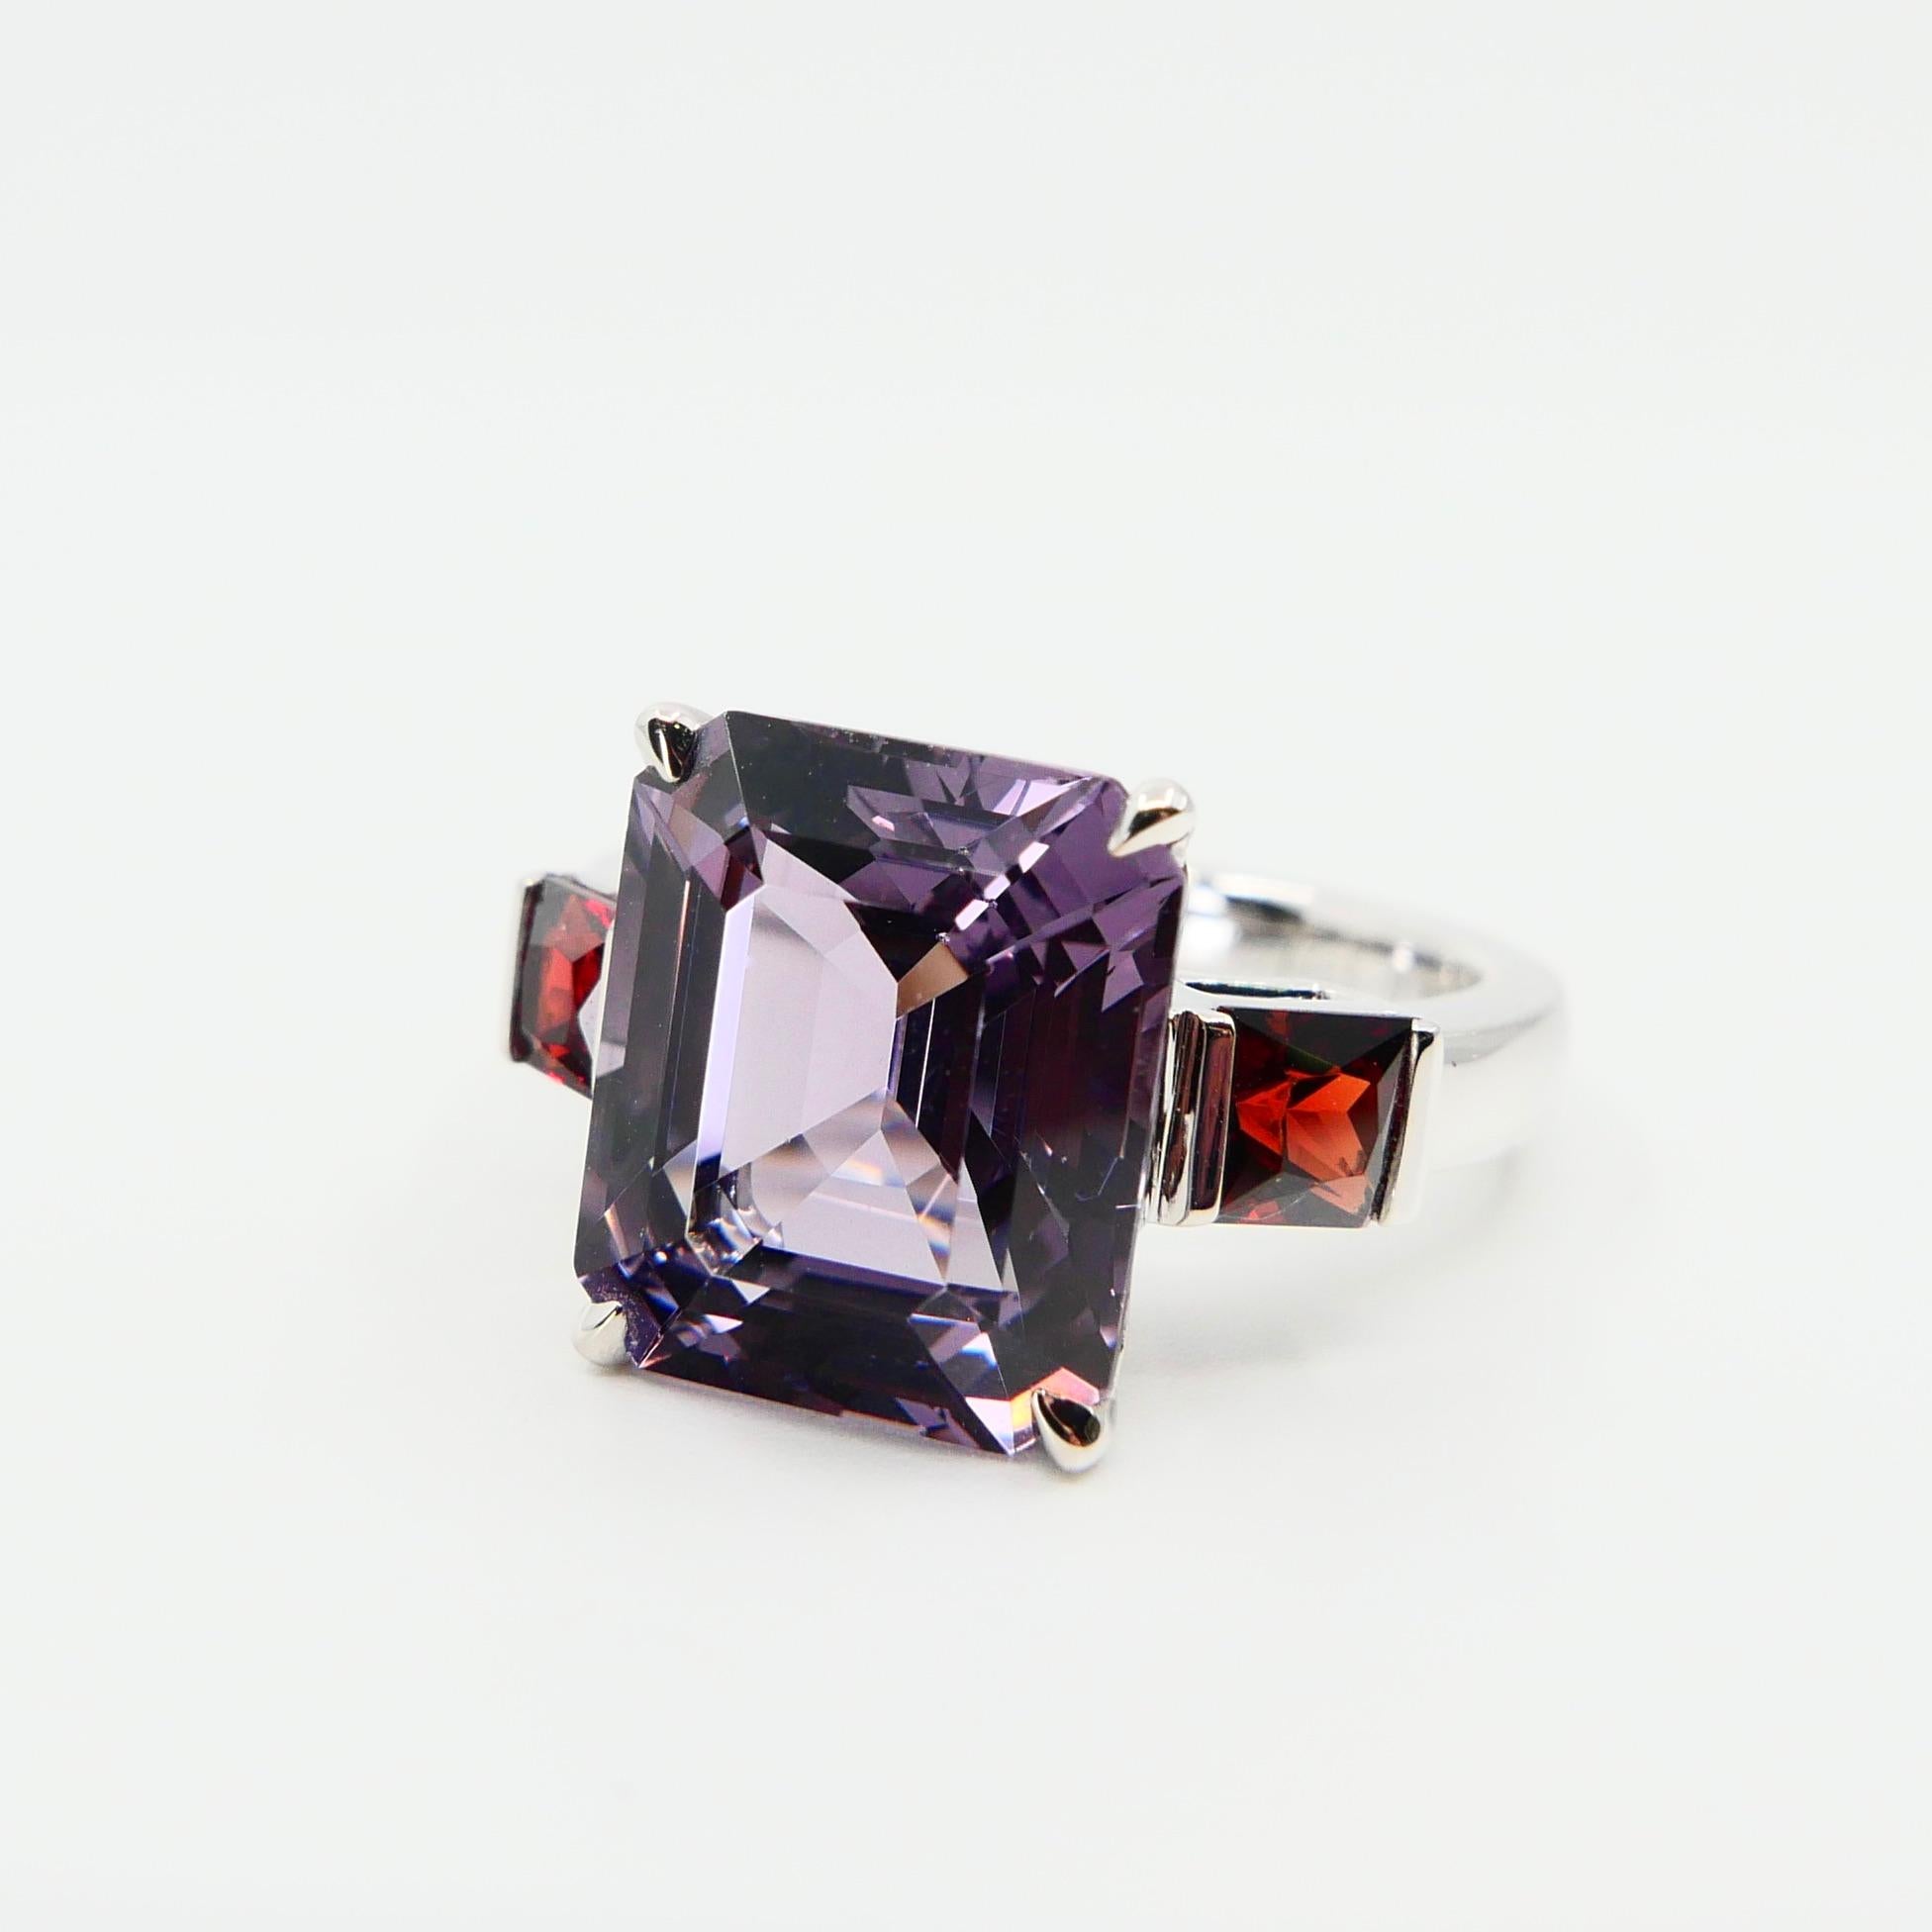 Natural 7.77 Cts Purple Spinel & 0.83 Carat Red Spinel Three-Stone Cocktail Ring 4